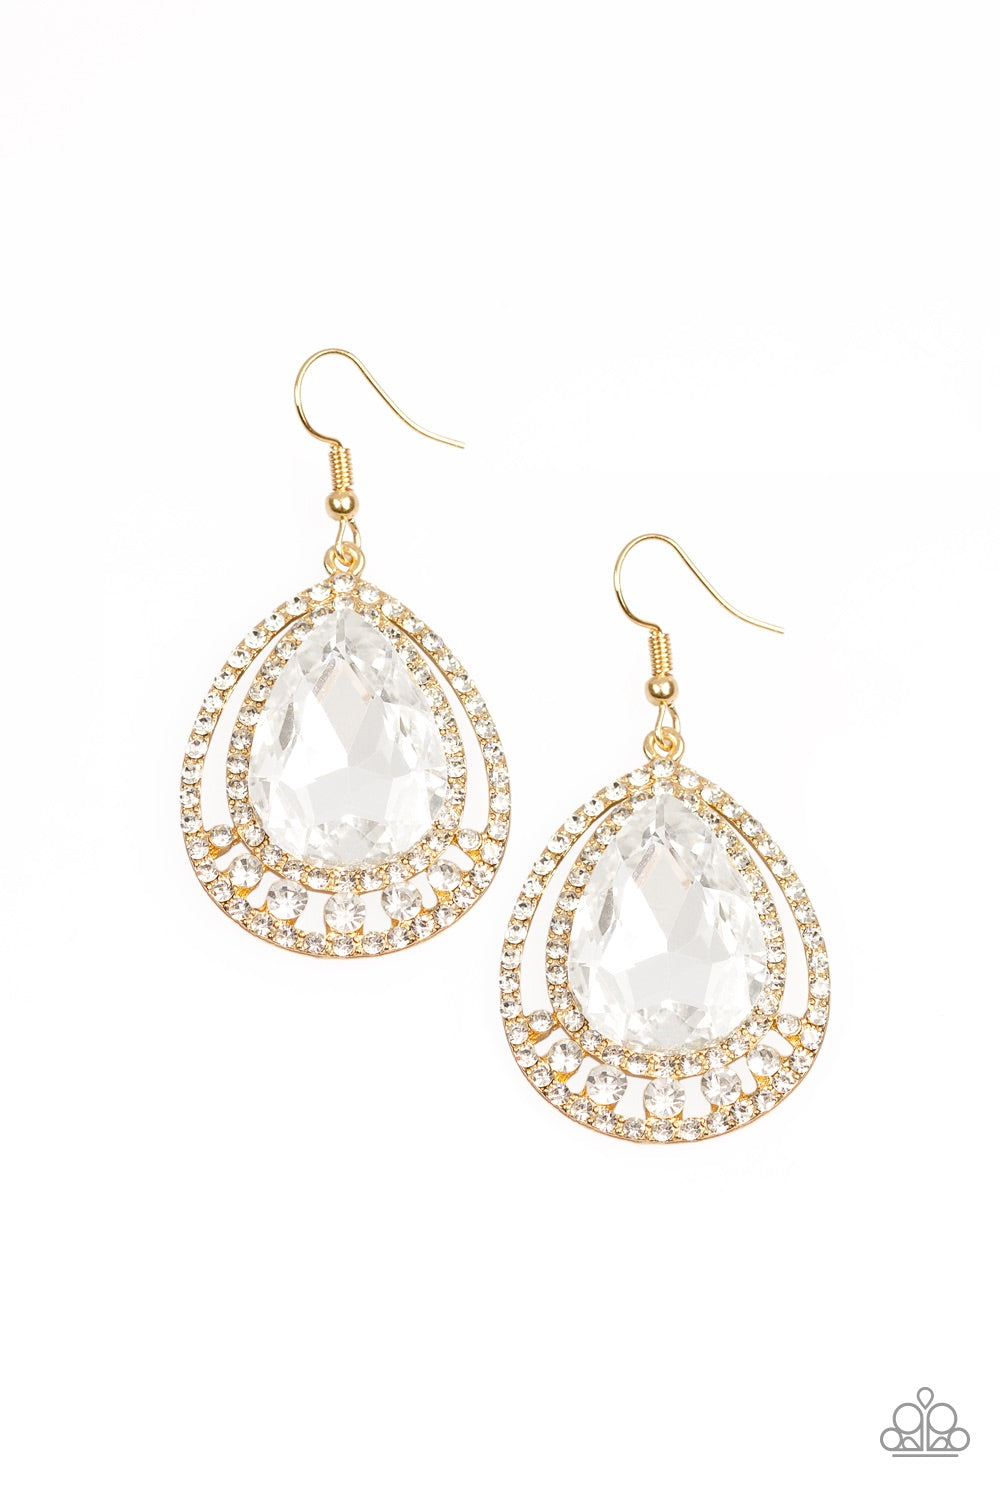 All Rise For Her Majesty Gold-Earrings